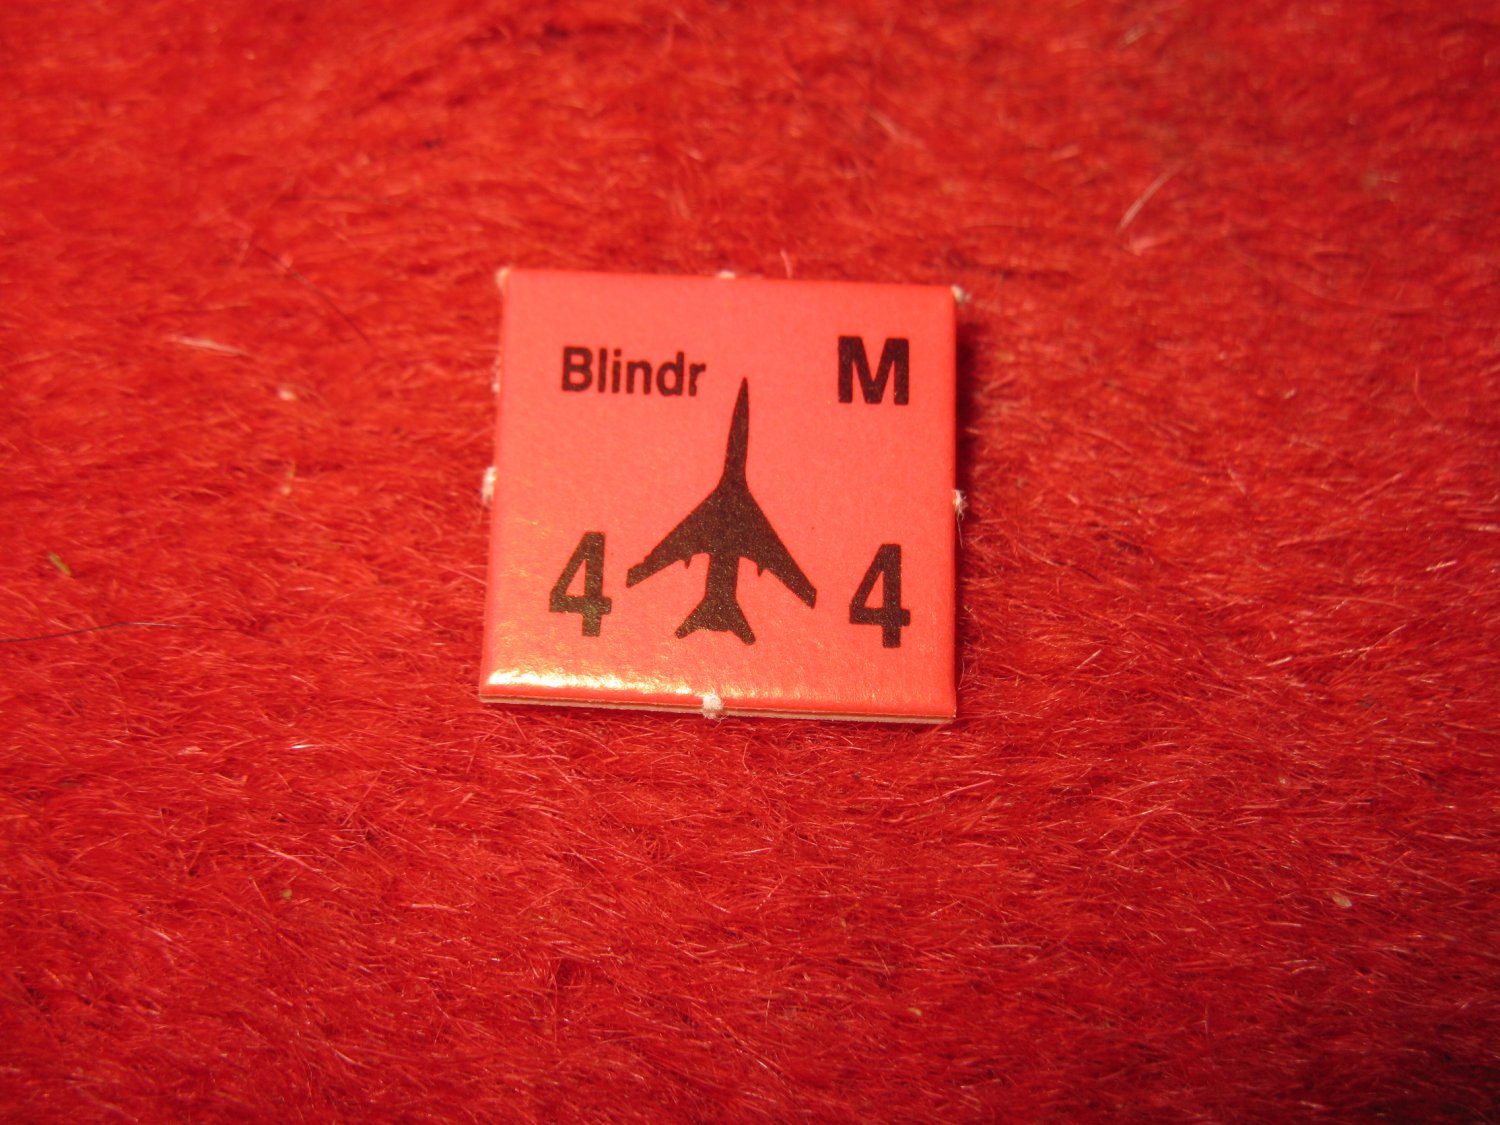 1988 The Hunt for Red October Board Game Piece: Blindr red Square Counter